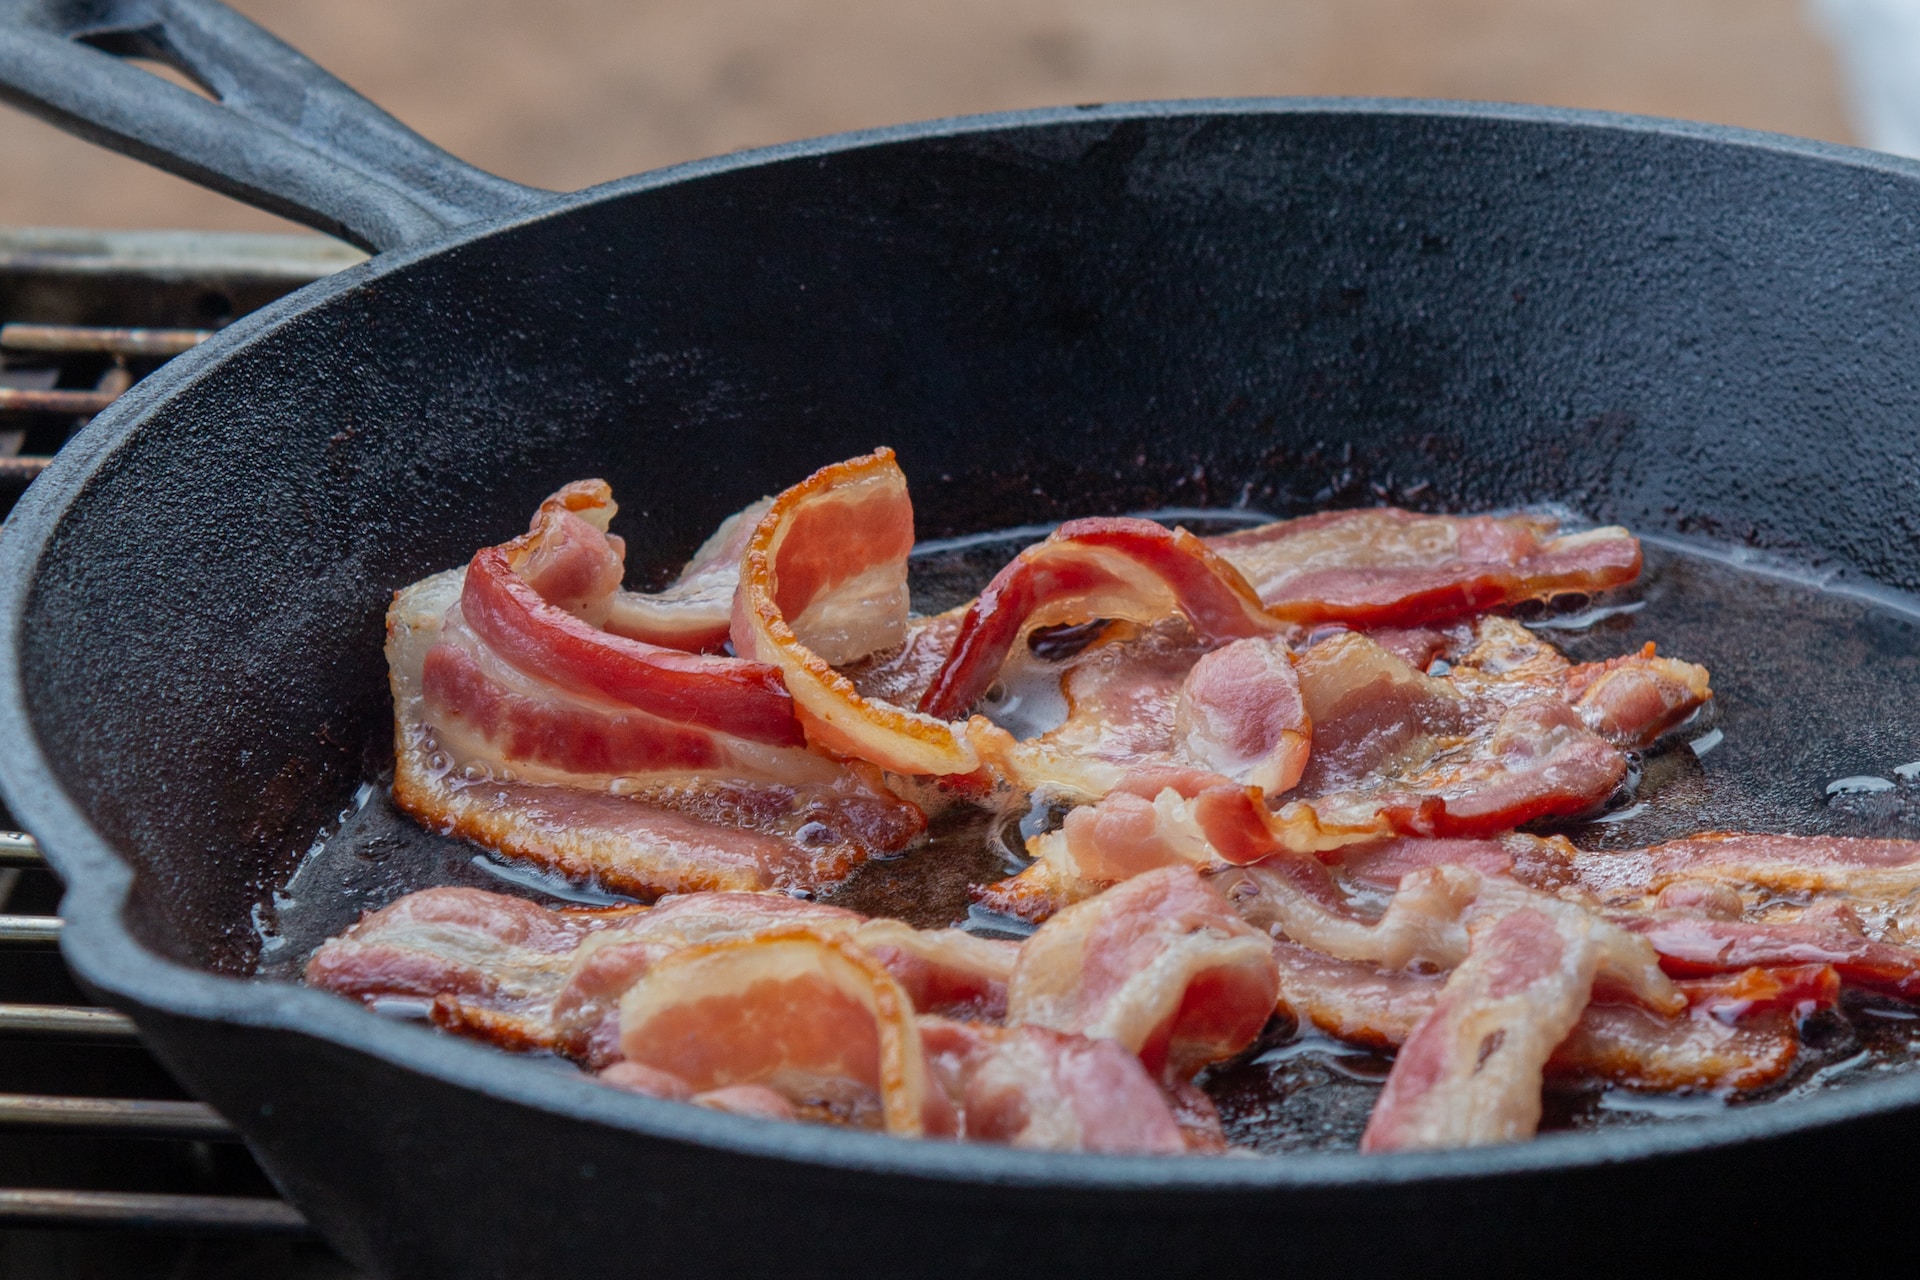 What Exactly is Bacon?